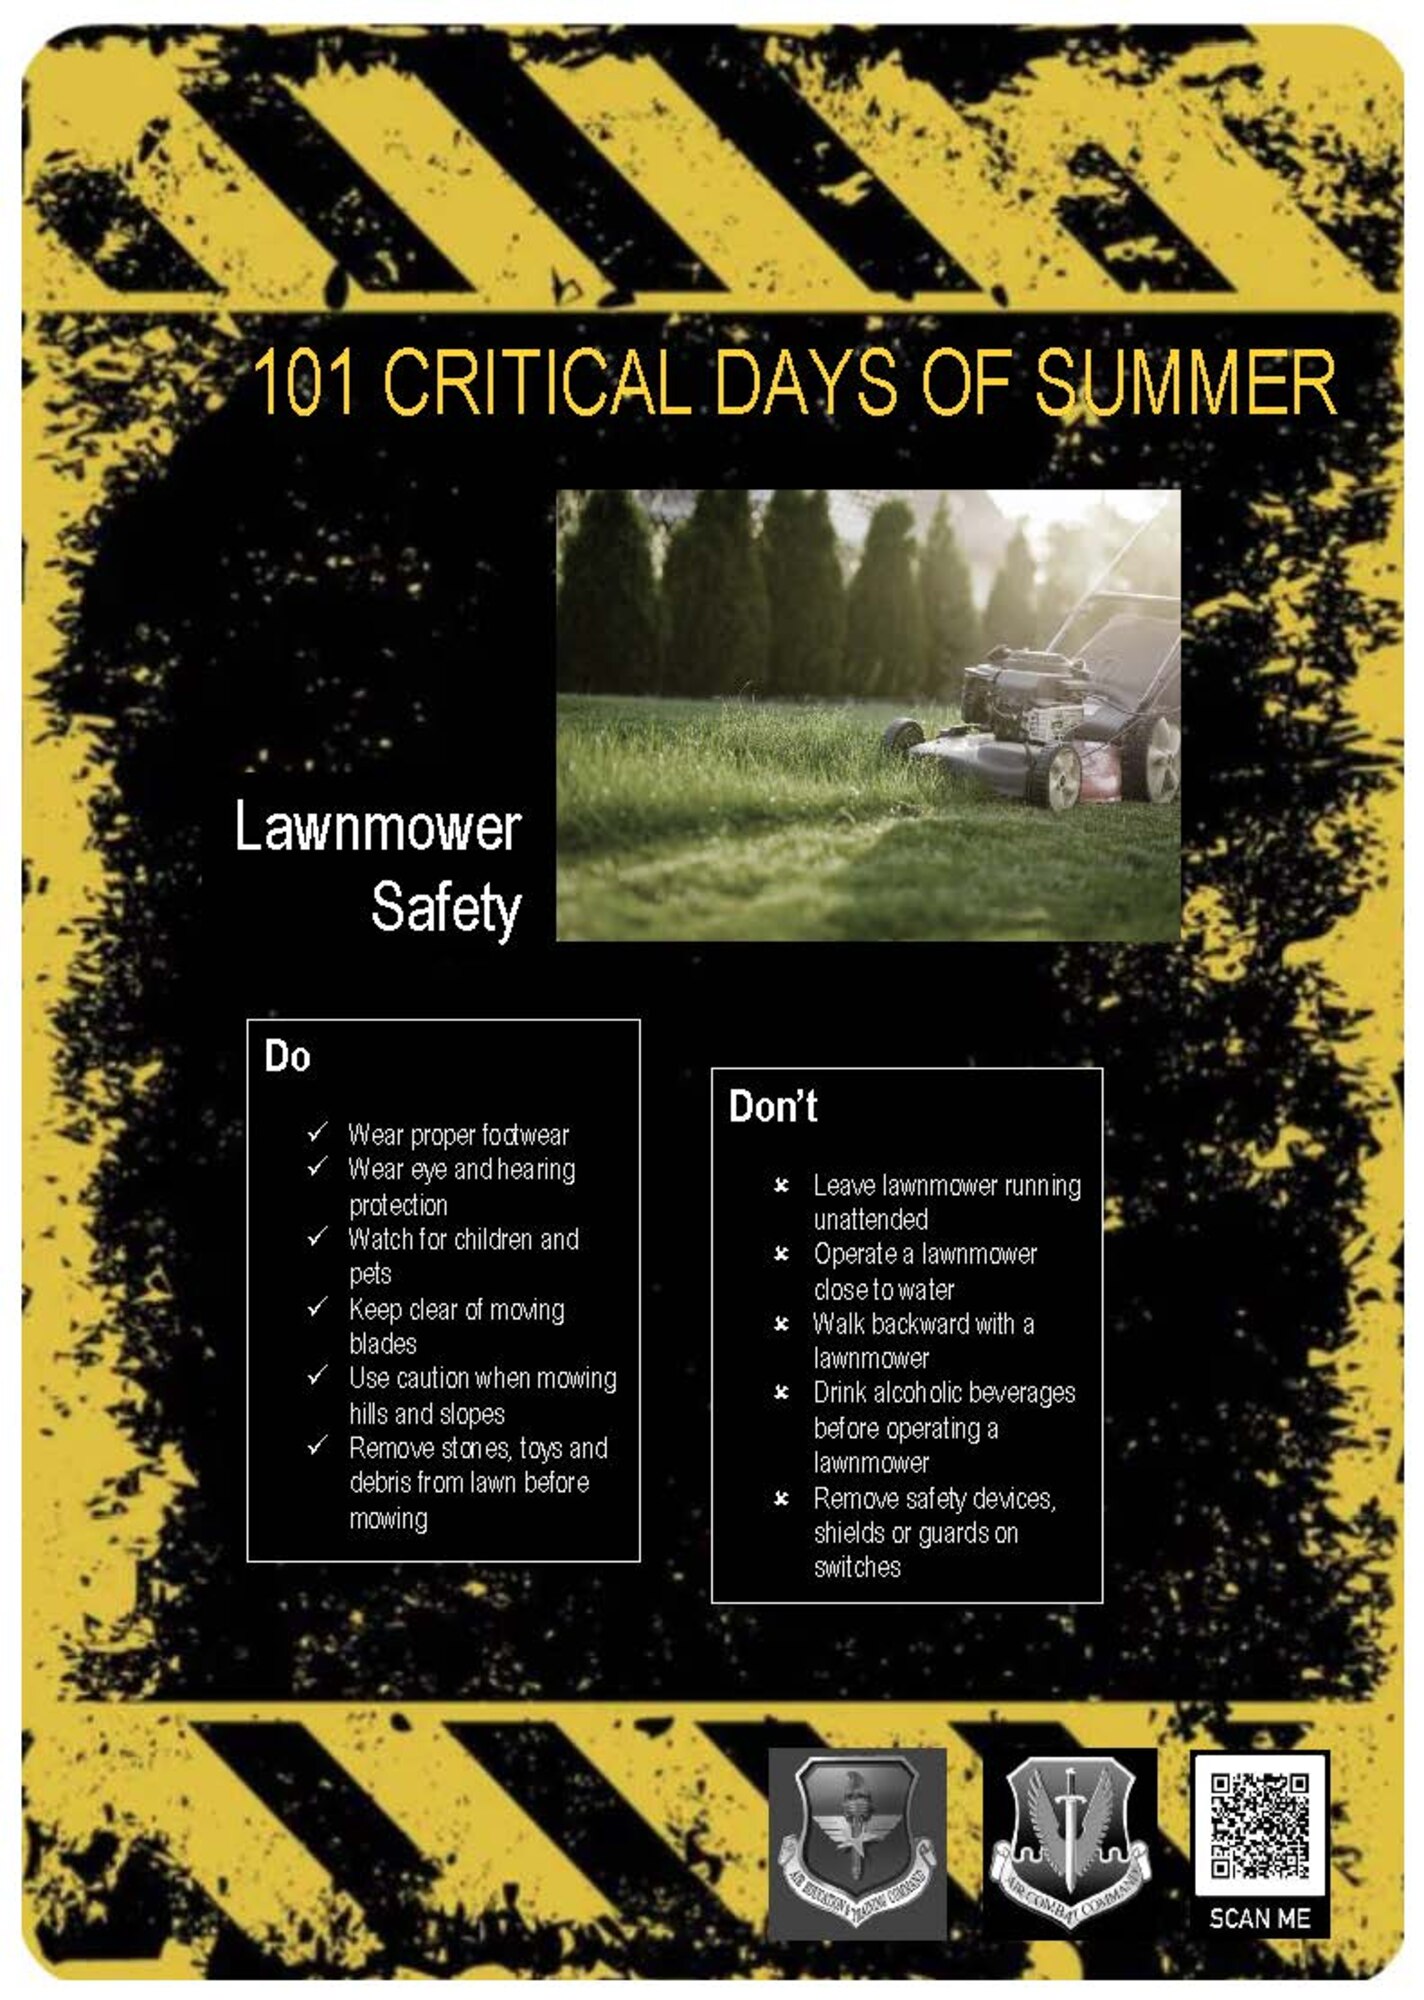 Employing risk management and being a good wingman can help prevent mishaps and fatalities throughout the summer season.